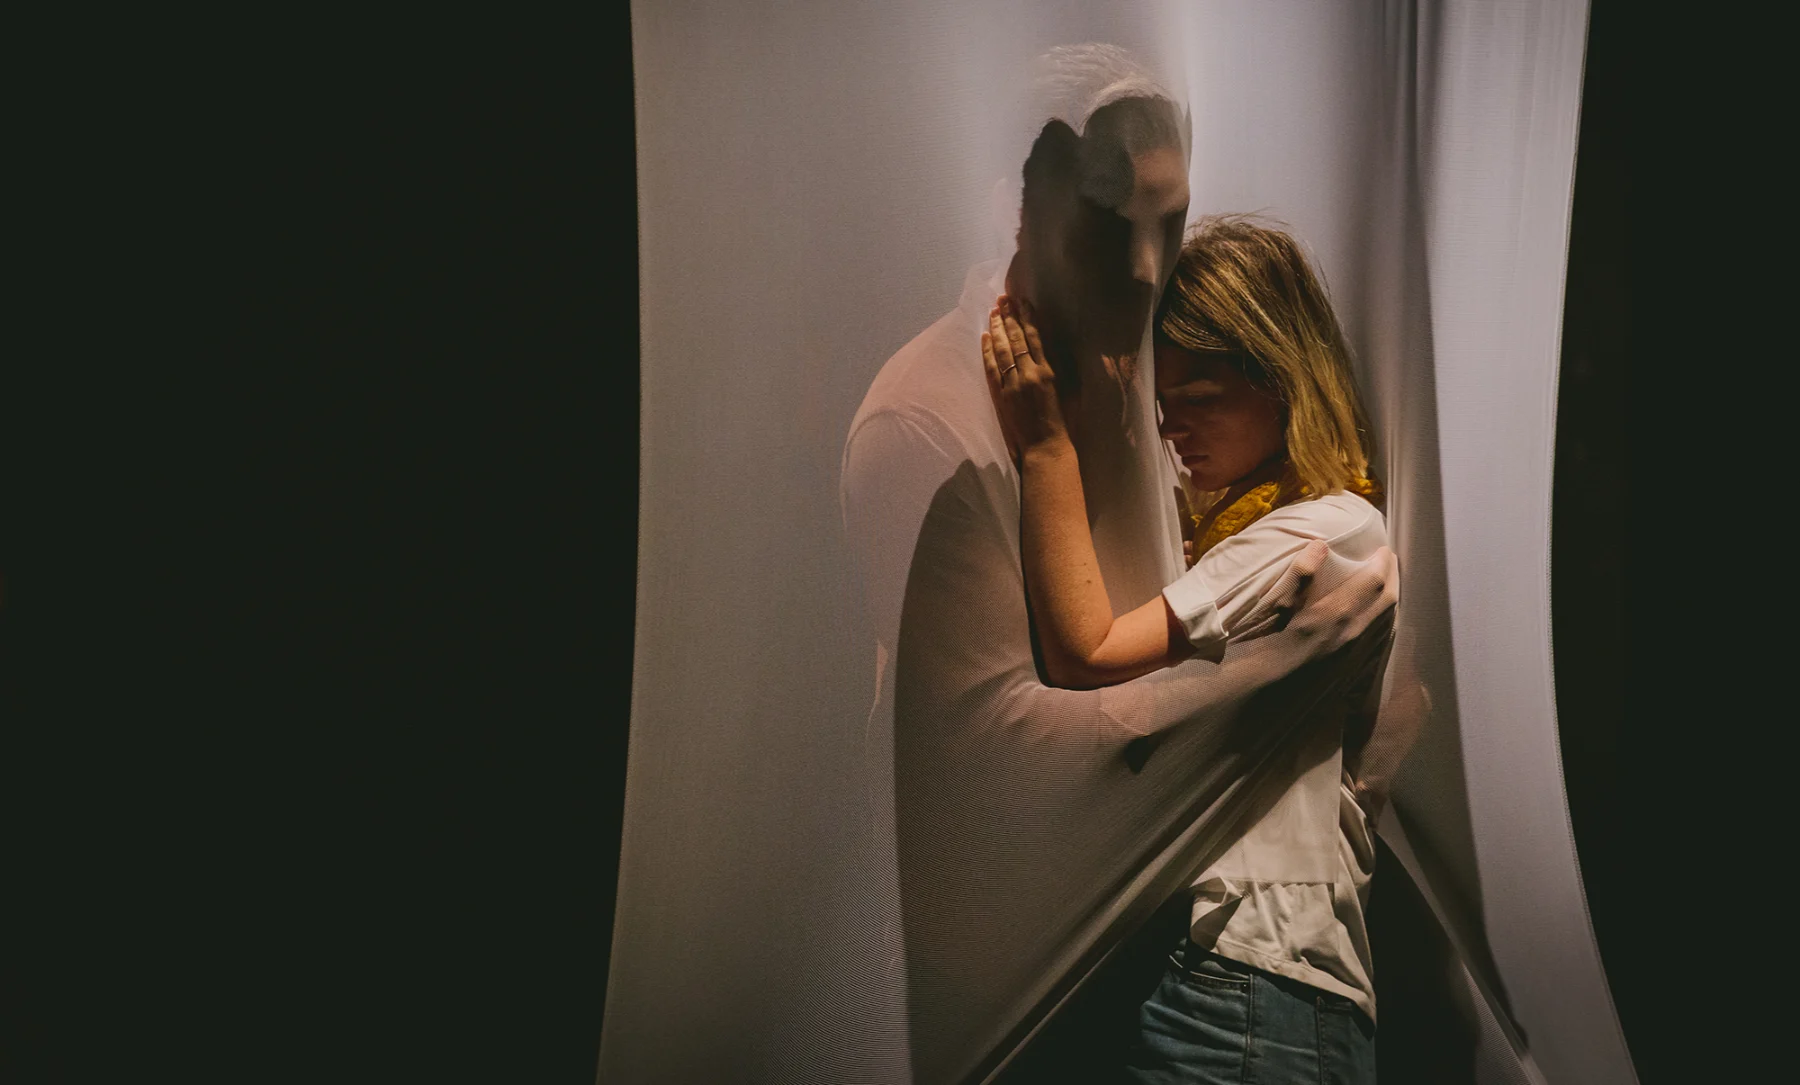 A man and women embracing, an image from a scene in a theatre piece from Sofya Gollan